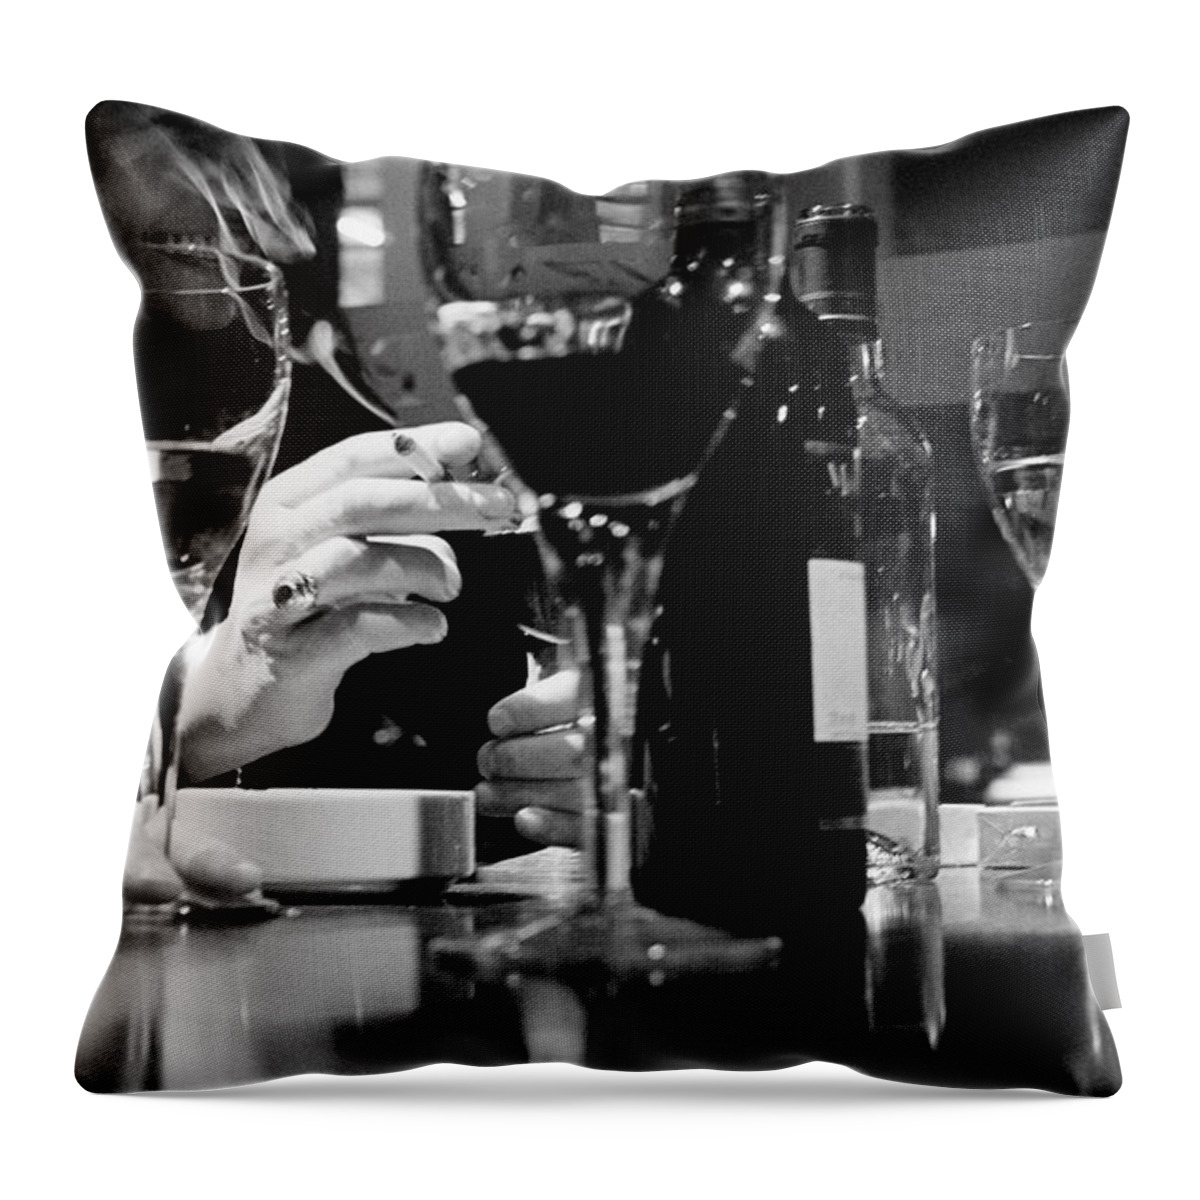 Smoking Throw Pillow featuring the photograph Glasses Of Wine by Matt Carr